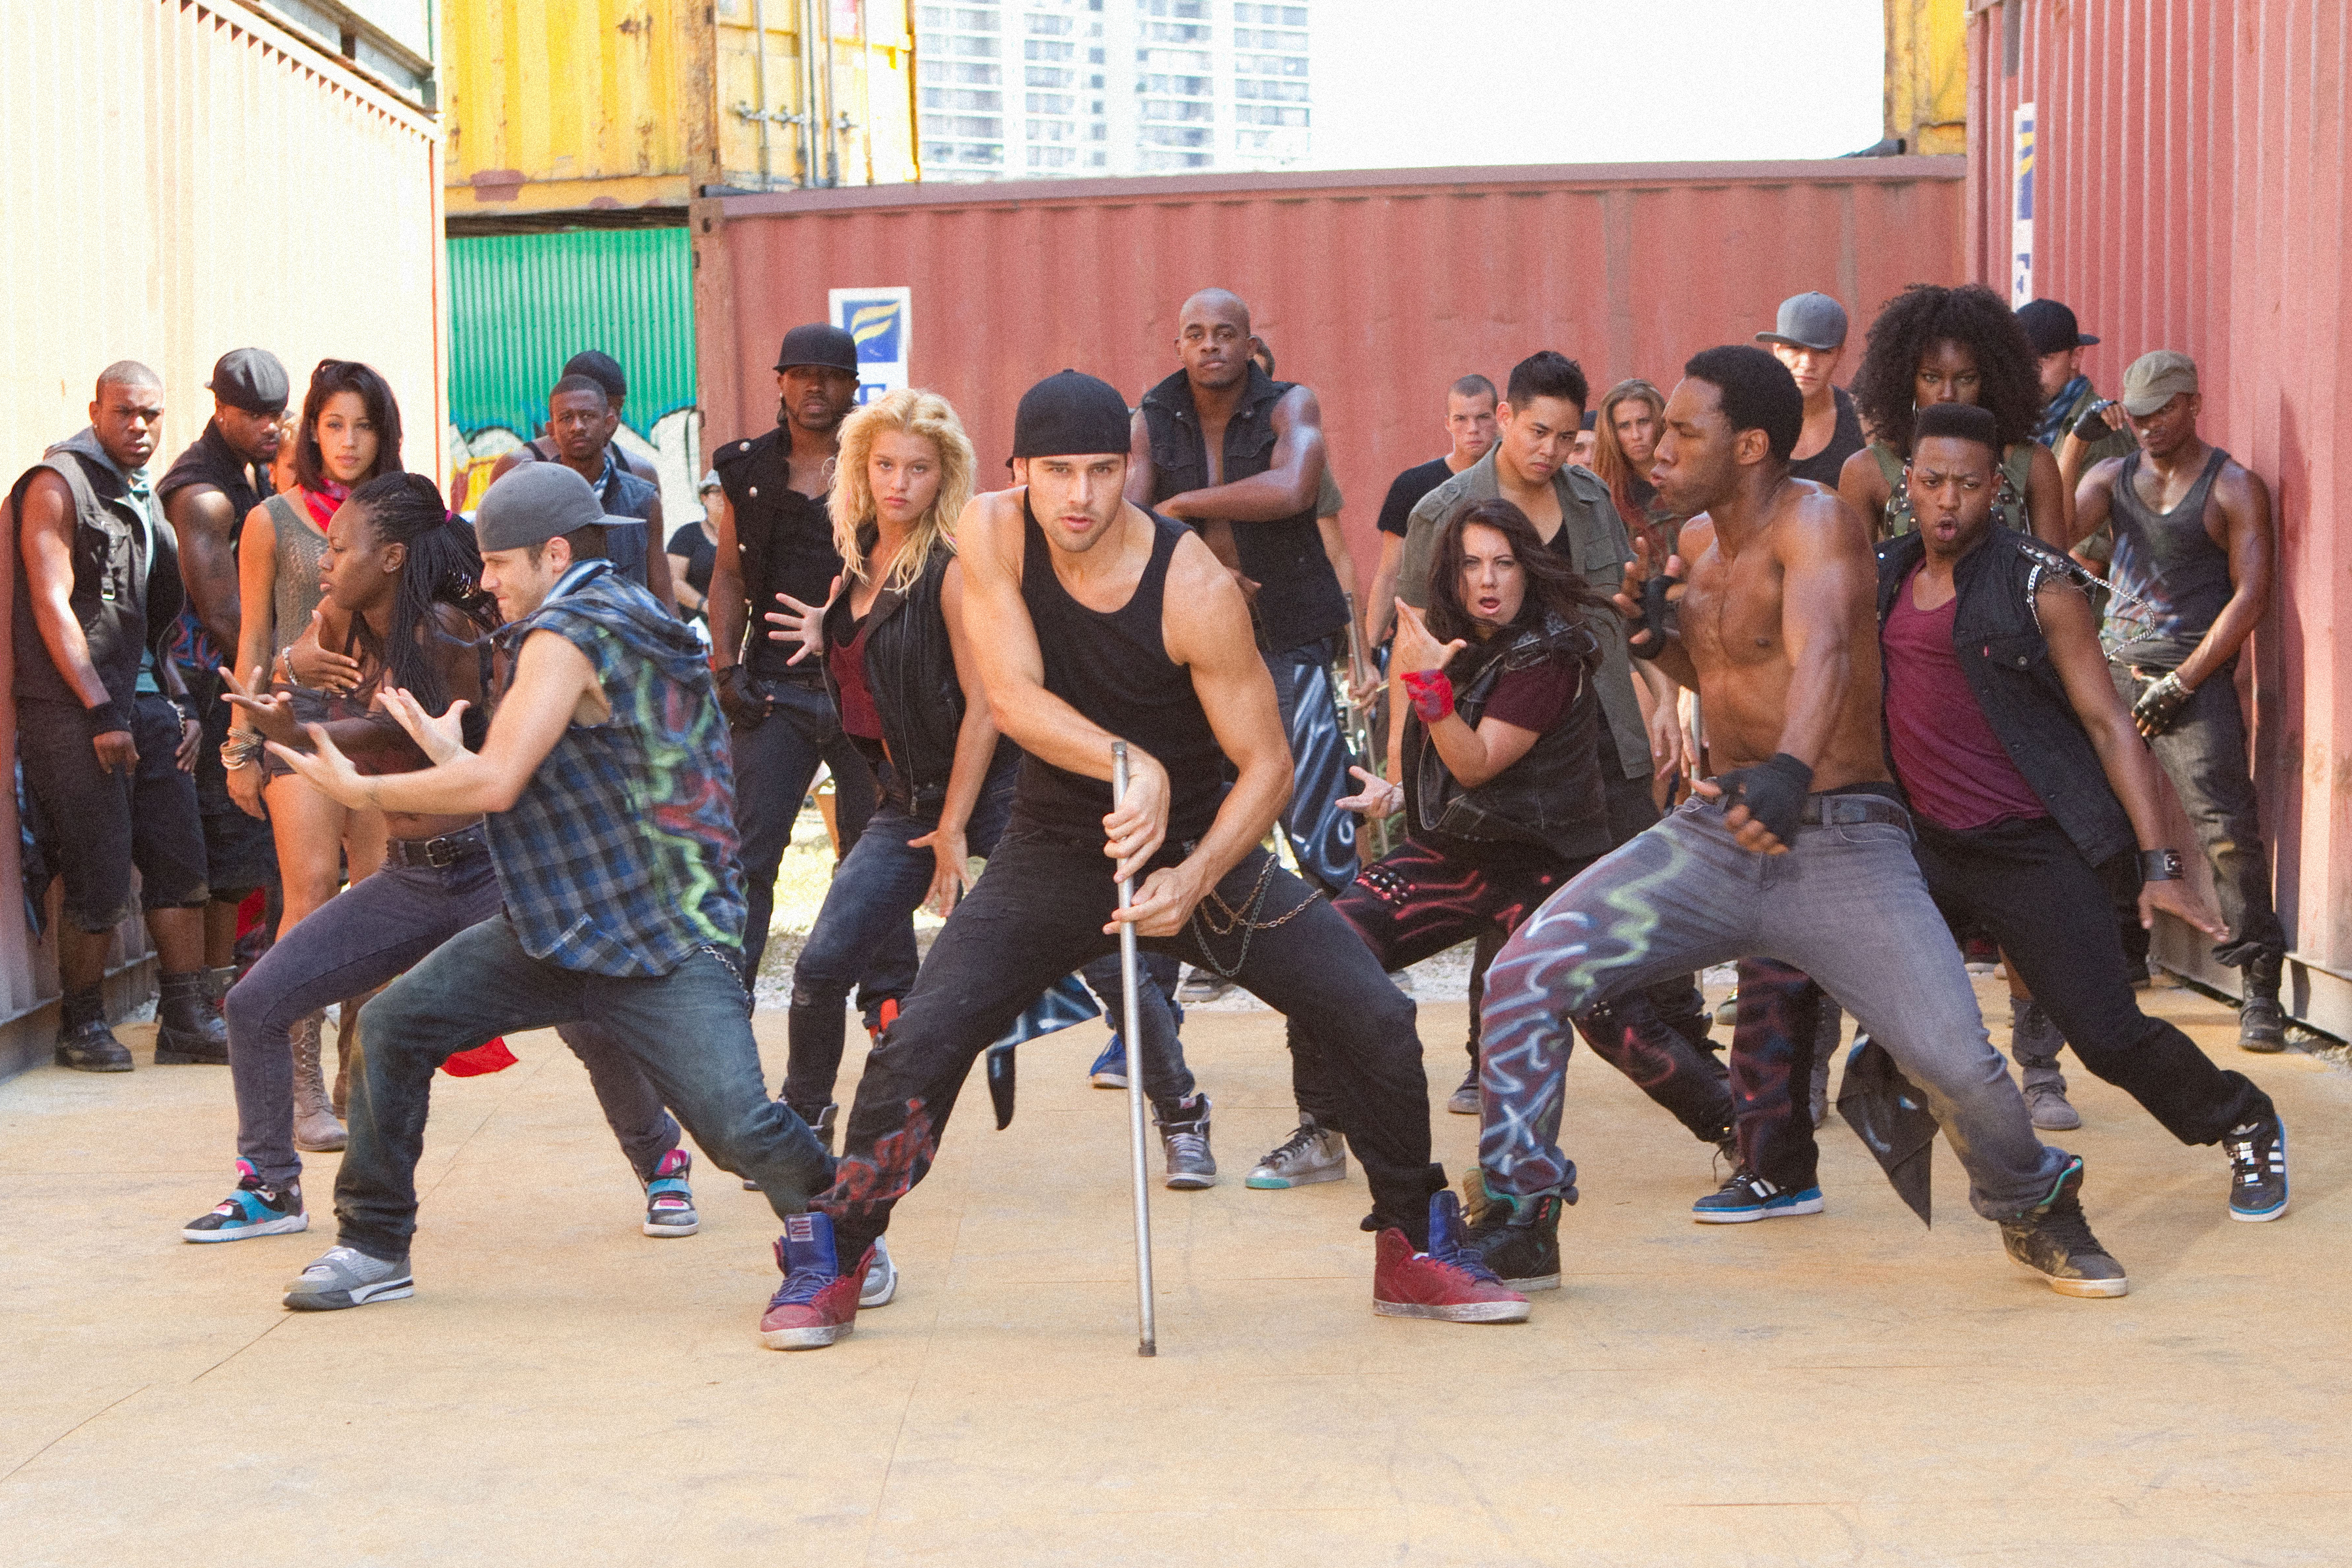 STEP UP REVOLUTION | Pure So You Think You Can Dance